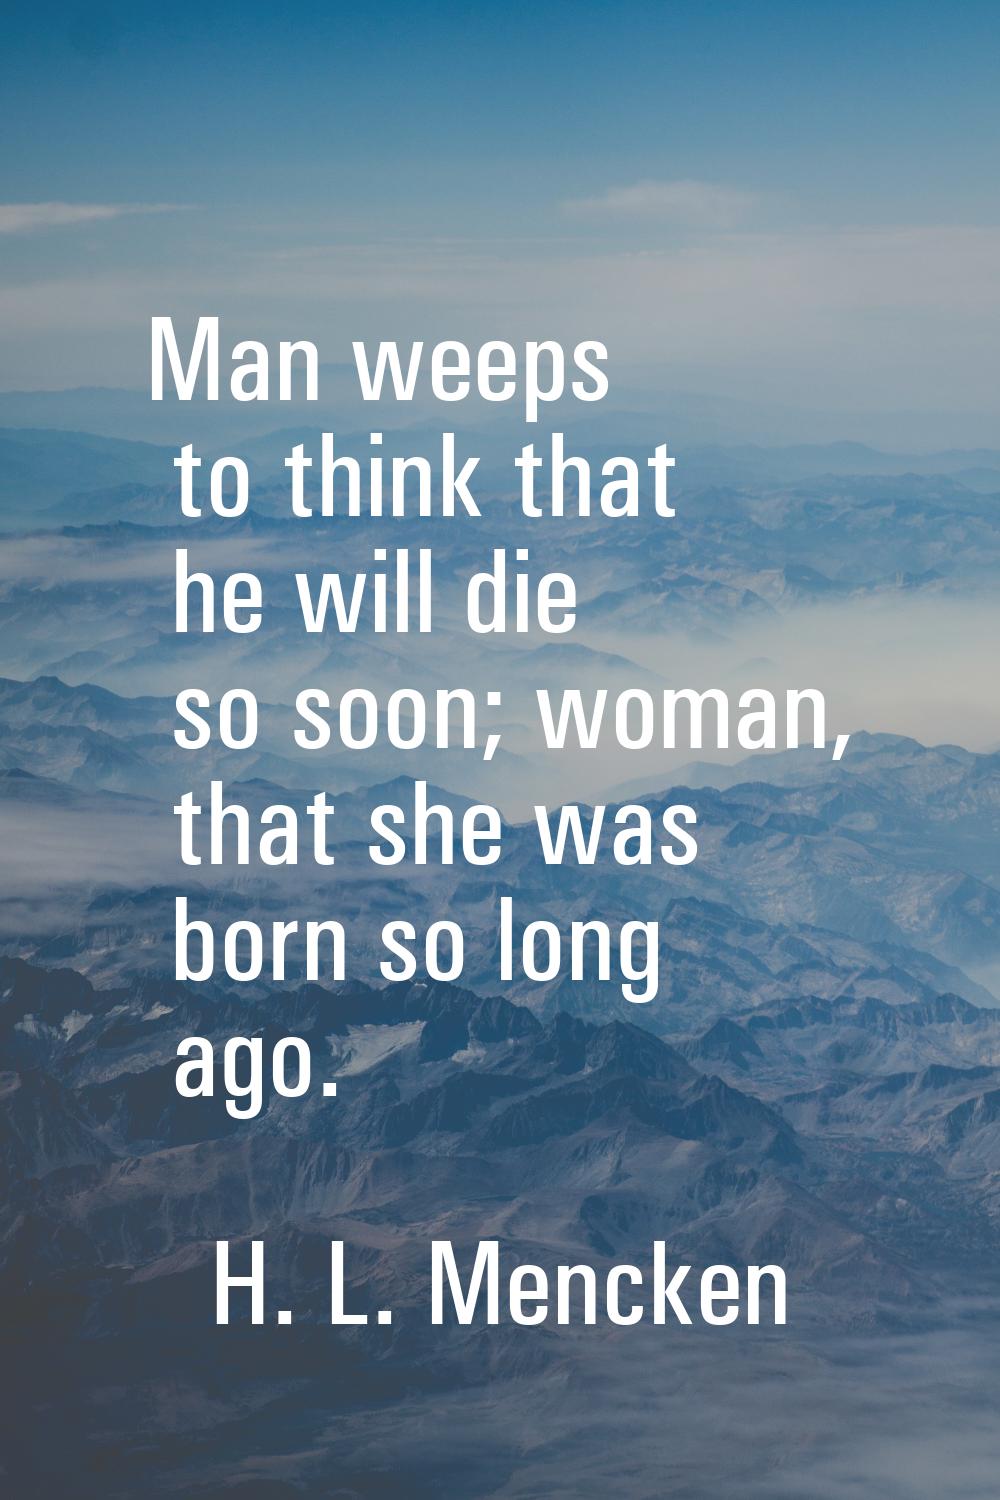 Man weeps to think that he will die so soon; woman, that she was born so long ago.